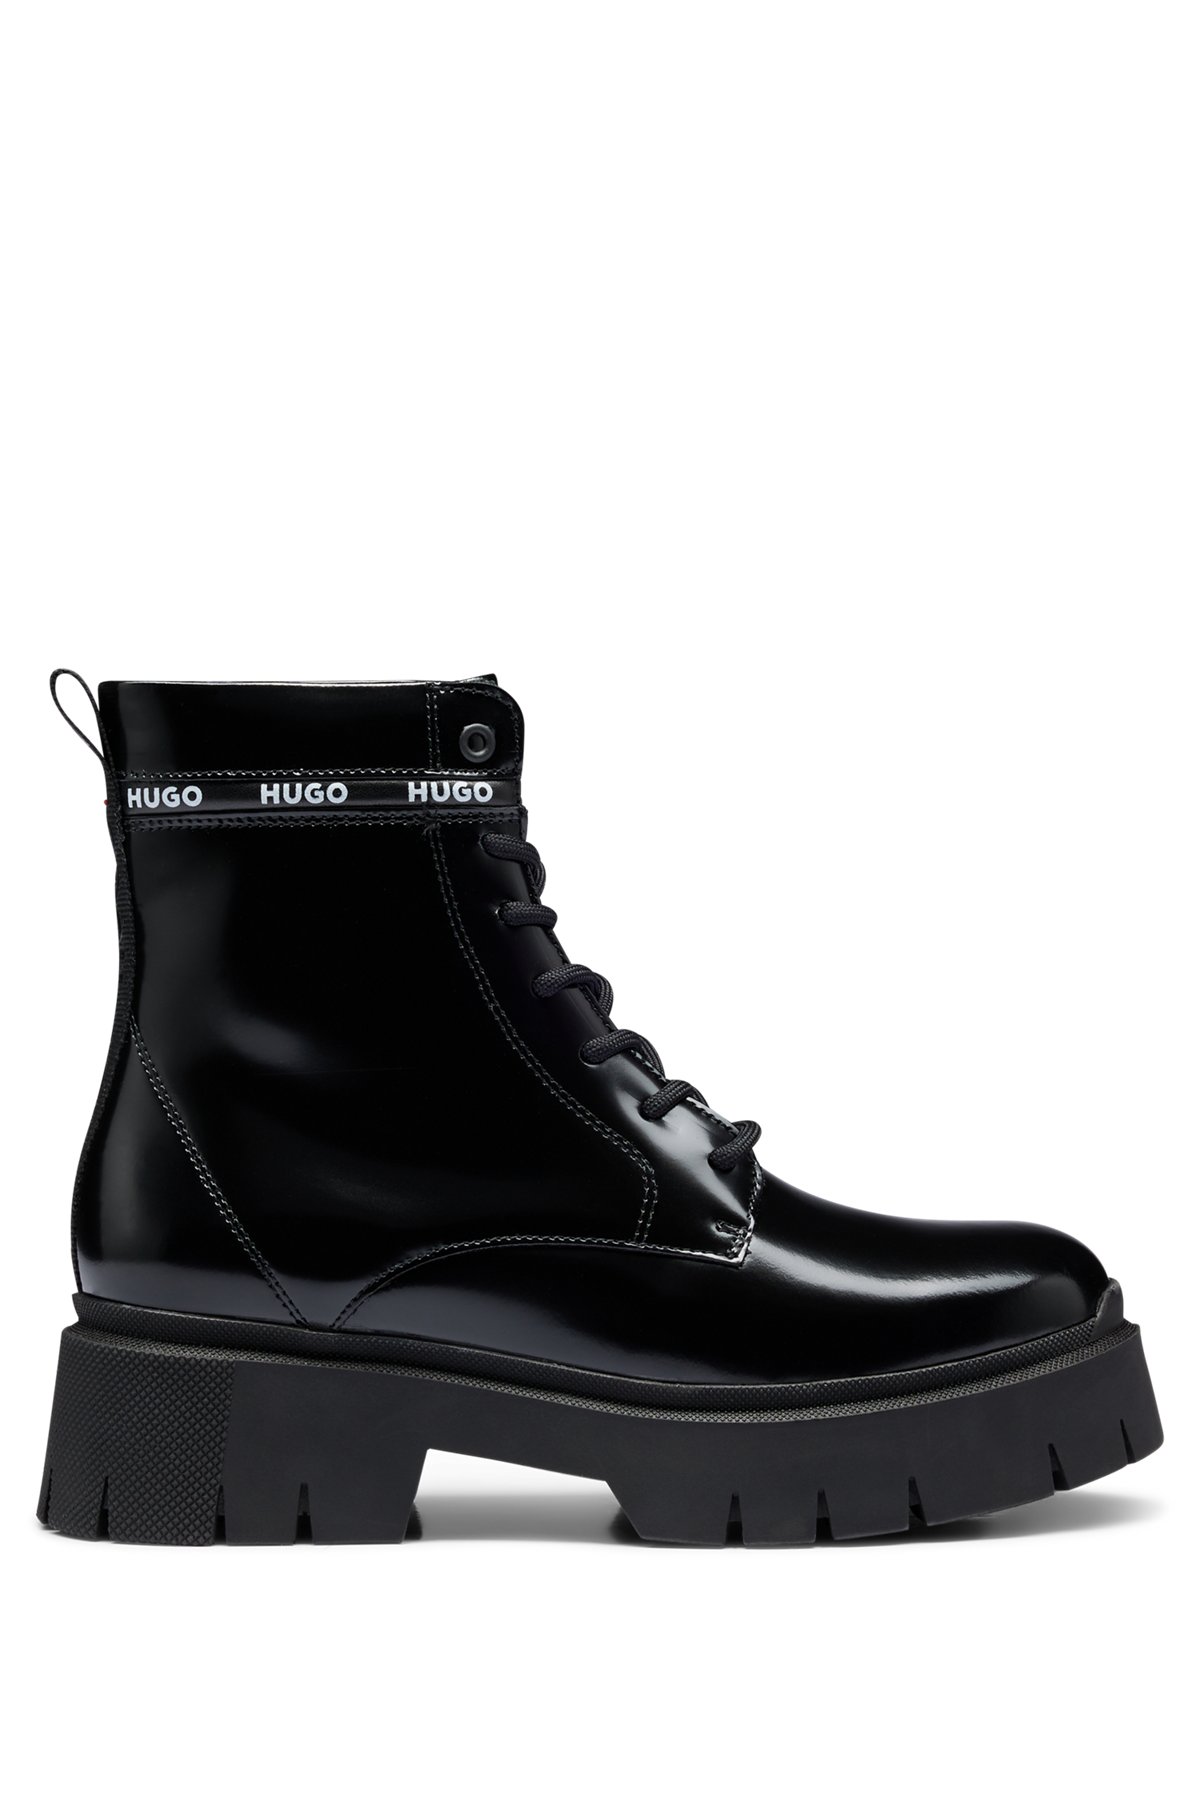 Calf boots in leather with logo-tape trim, Black